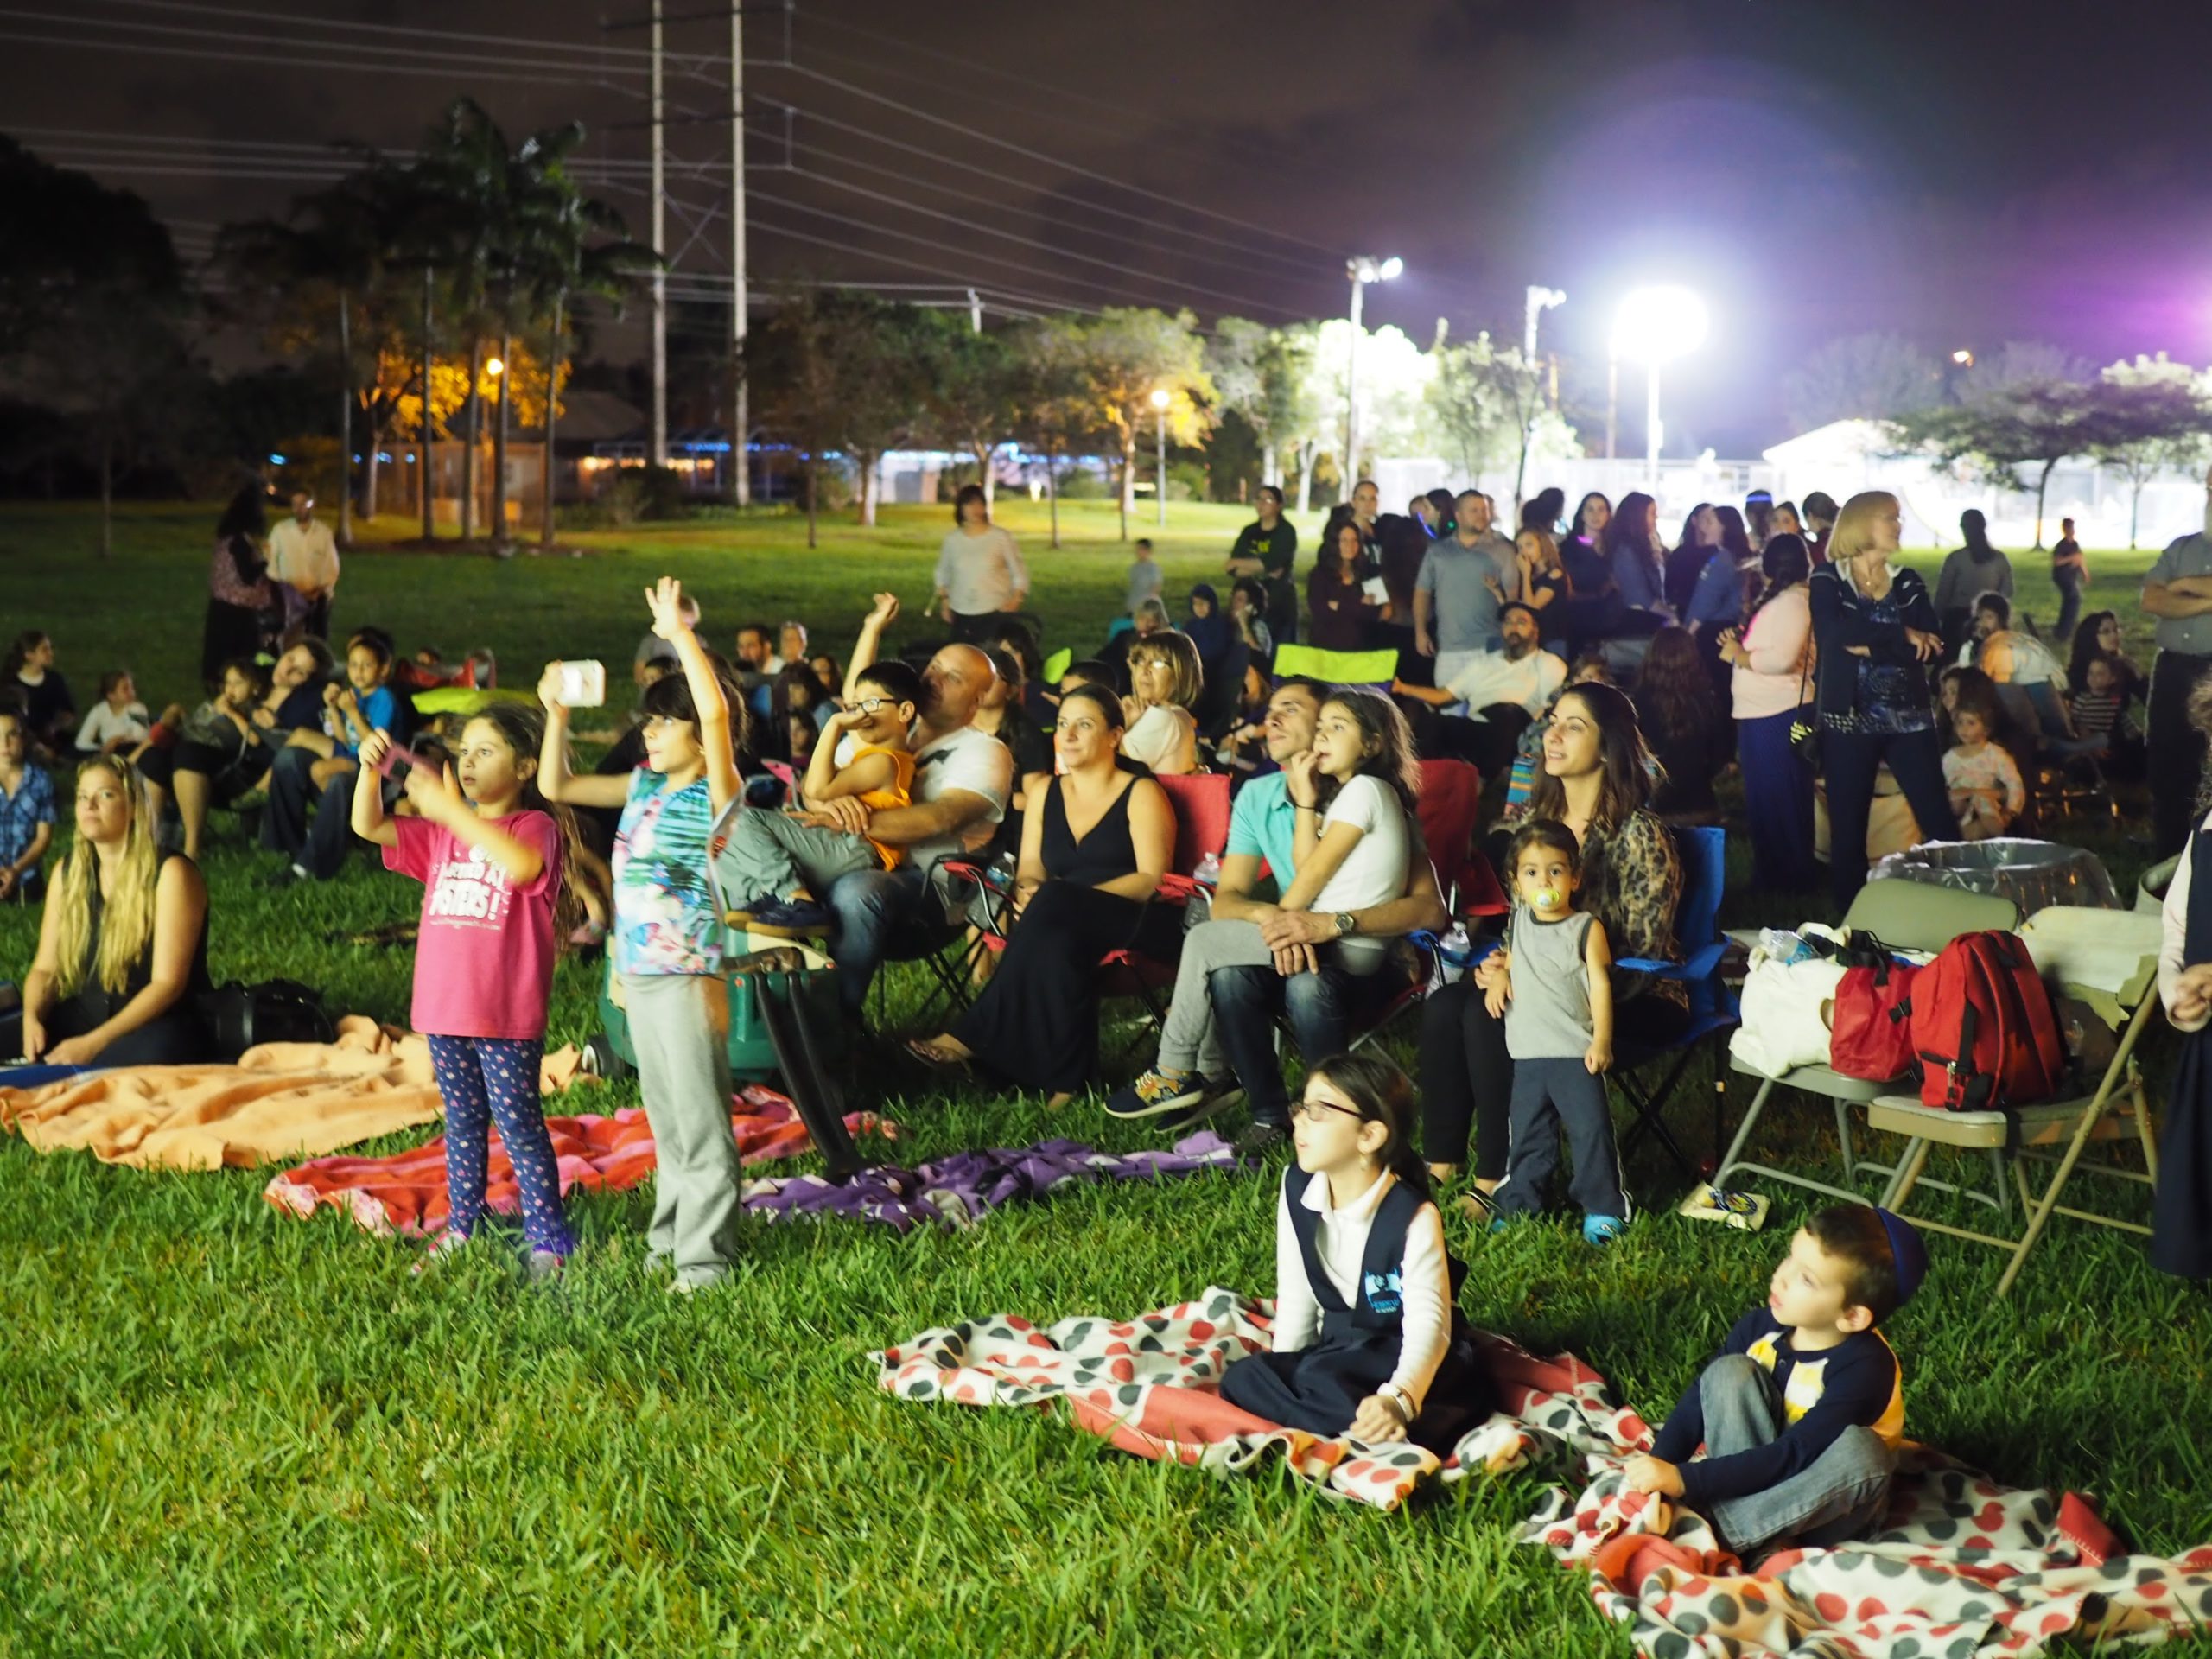 Chabad Centers of Coral Springs Hosts Chanukah Celebration on December 18